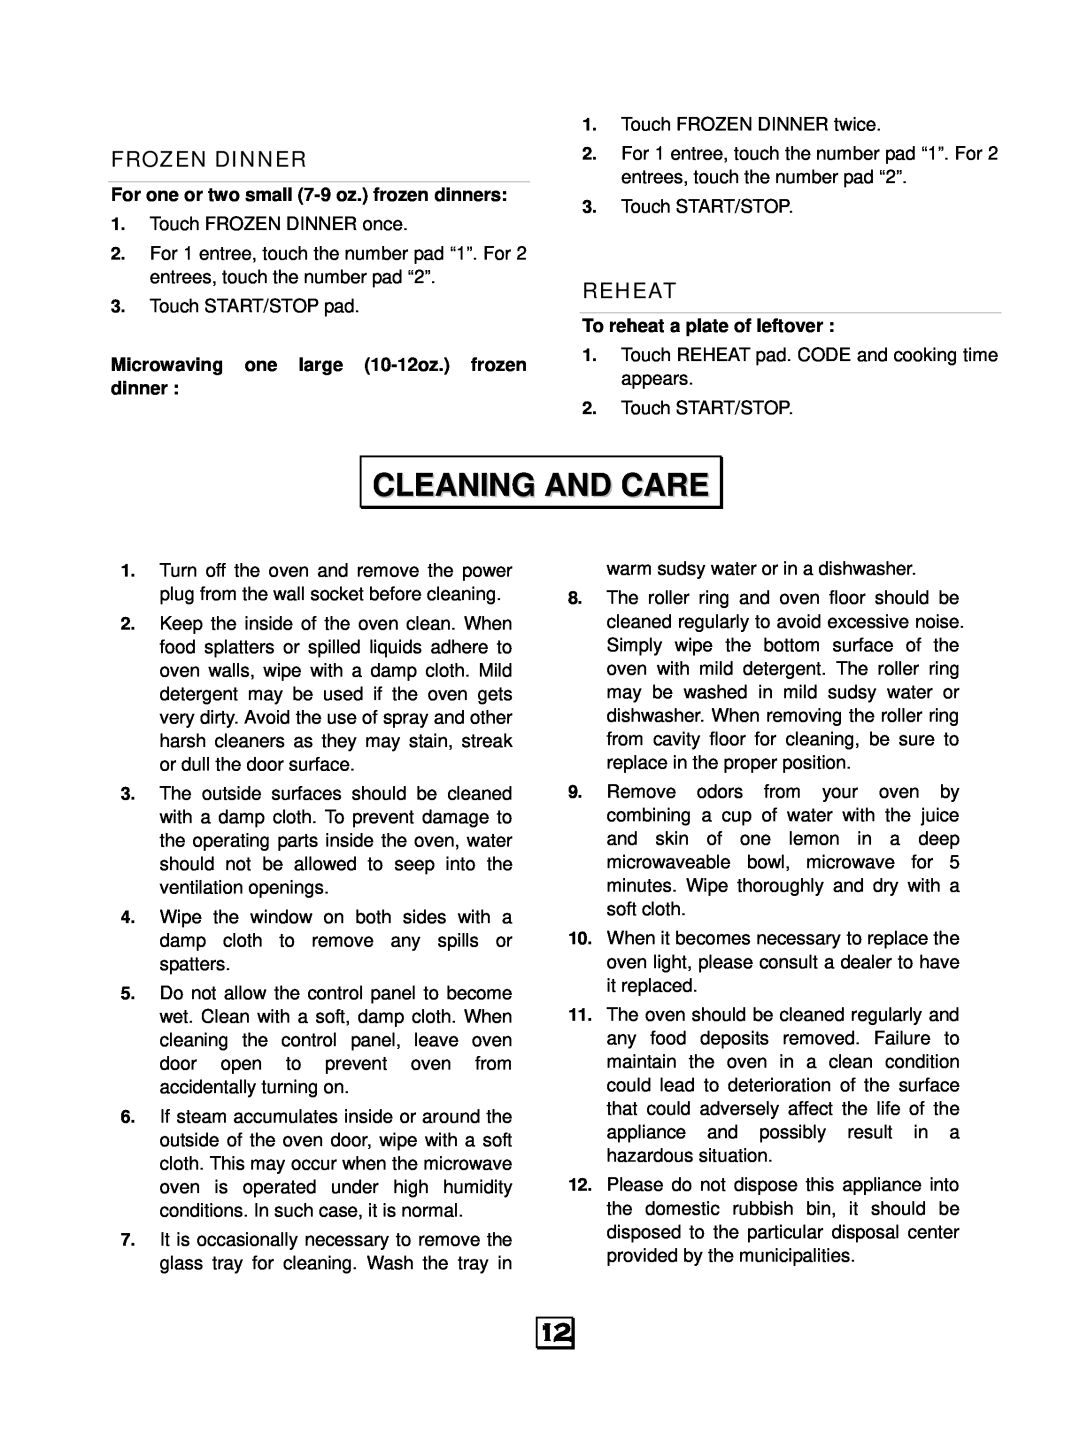 RCA RMW1143 owner manual Cleaning And Care, Frozen Dinner, Reheat 